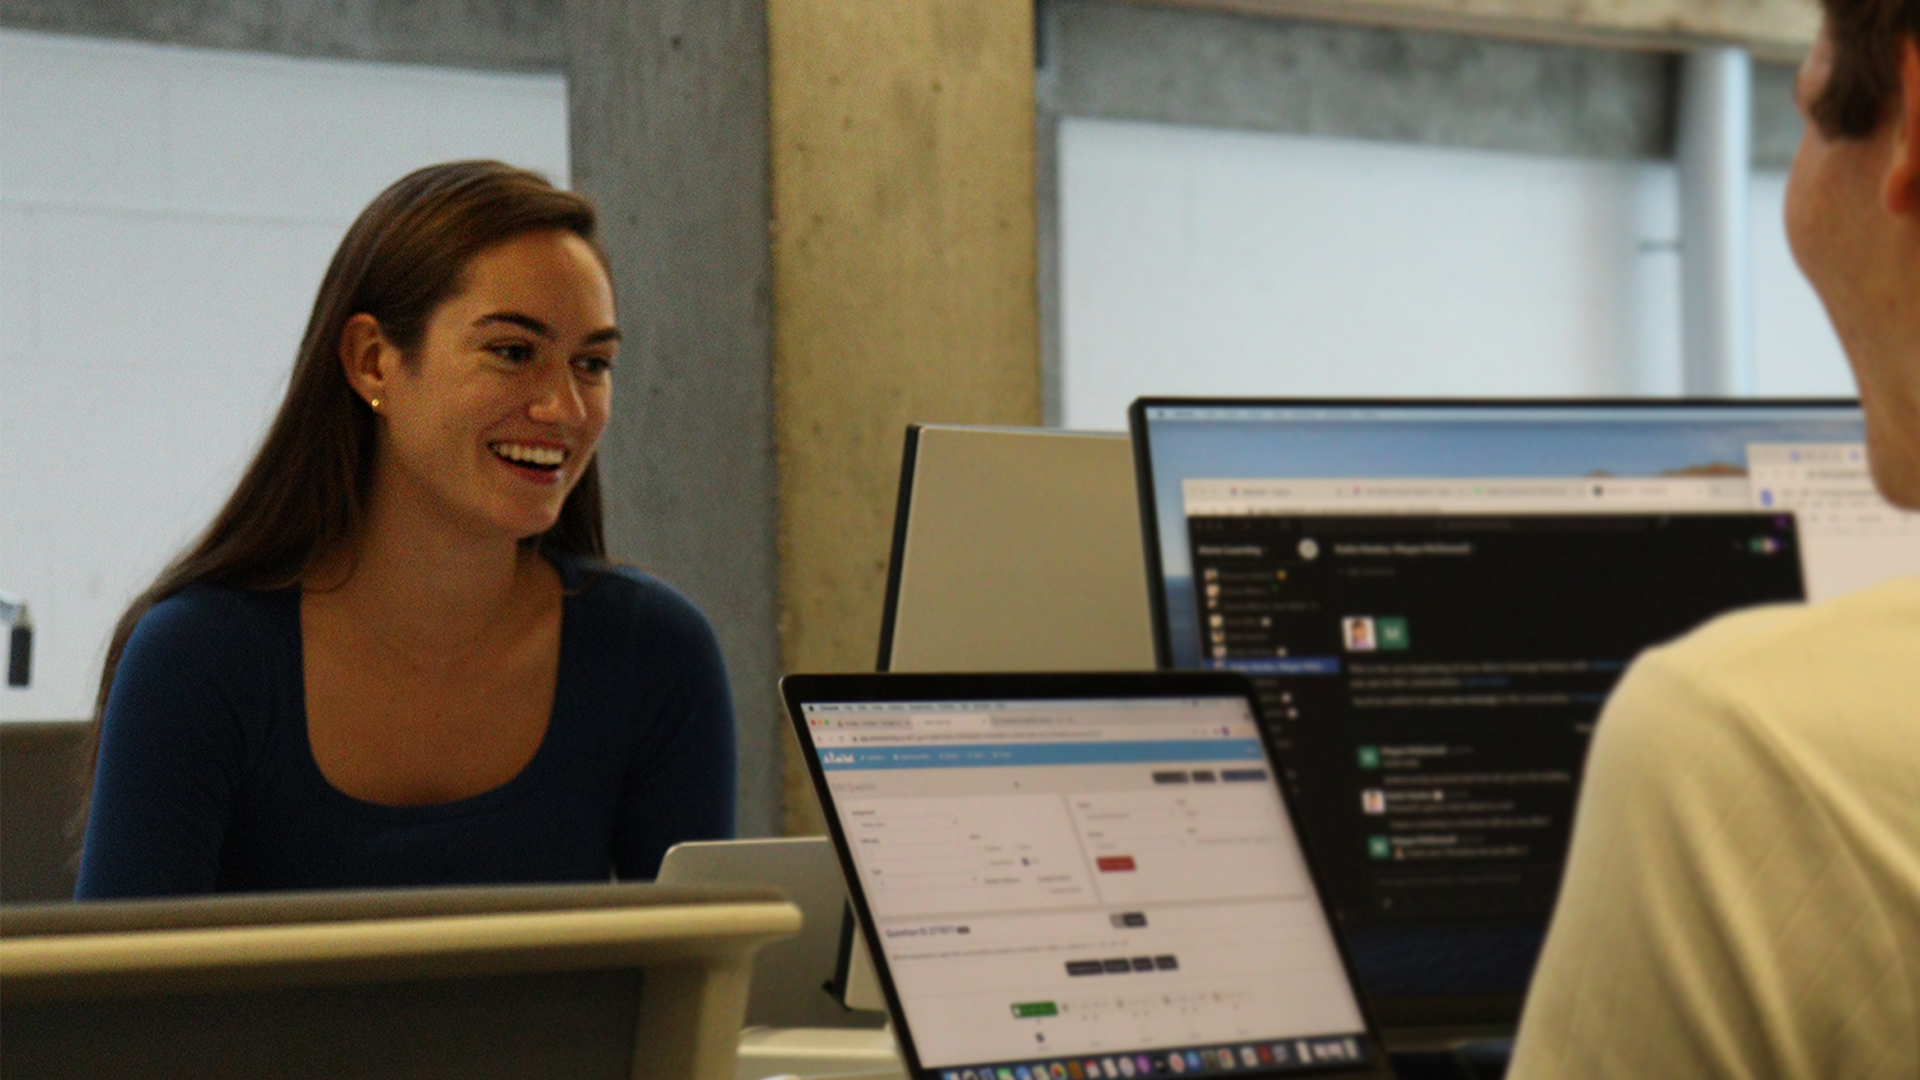 Atom employee with brown hair smiling